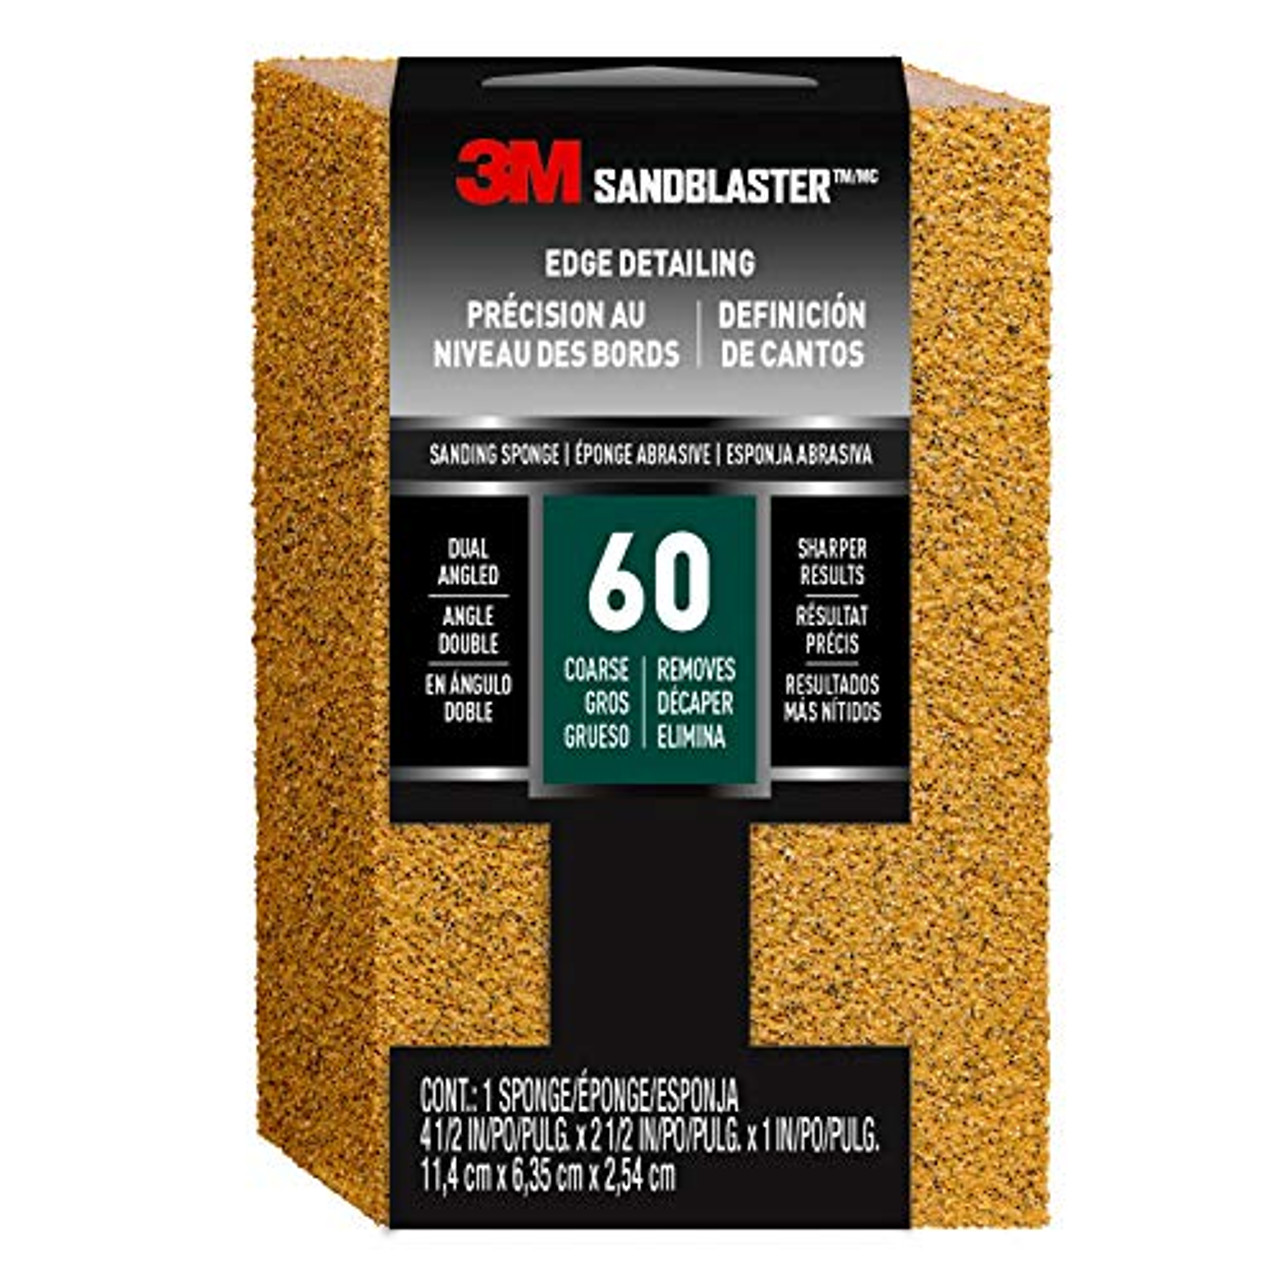 3M 9558 SandBlaster Paint Stripping Dual Angle Sanding Sponge, 4.5 in. x 2.5 in. x 1 in, 60 Grit, 1/Pack